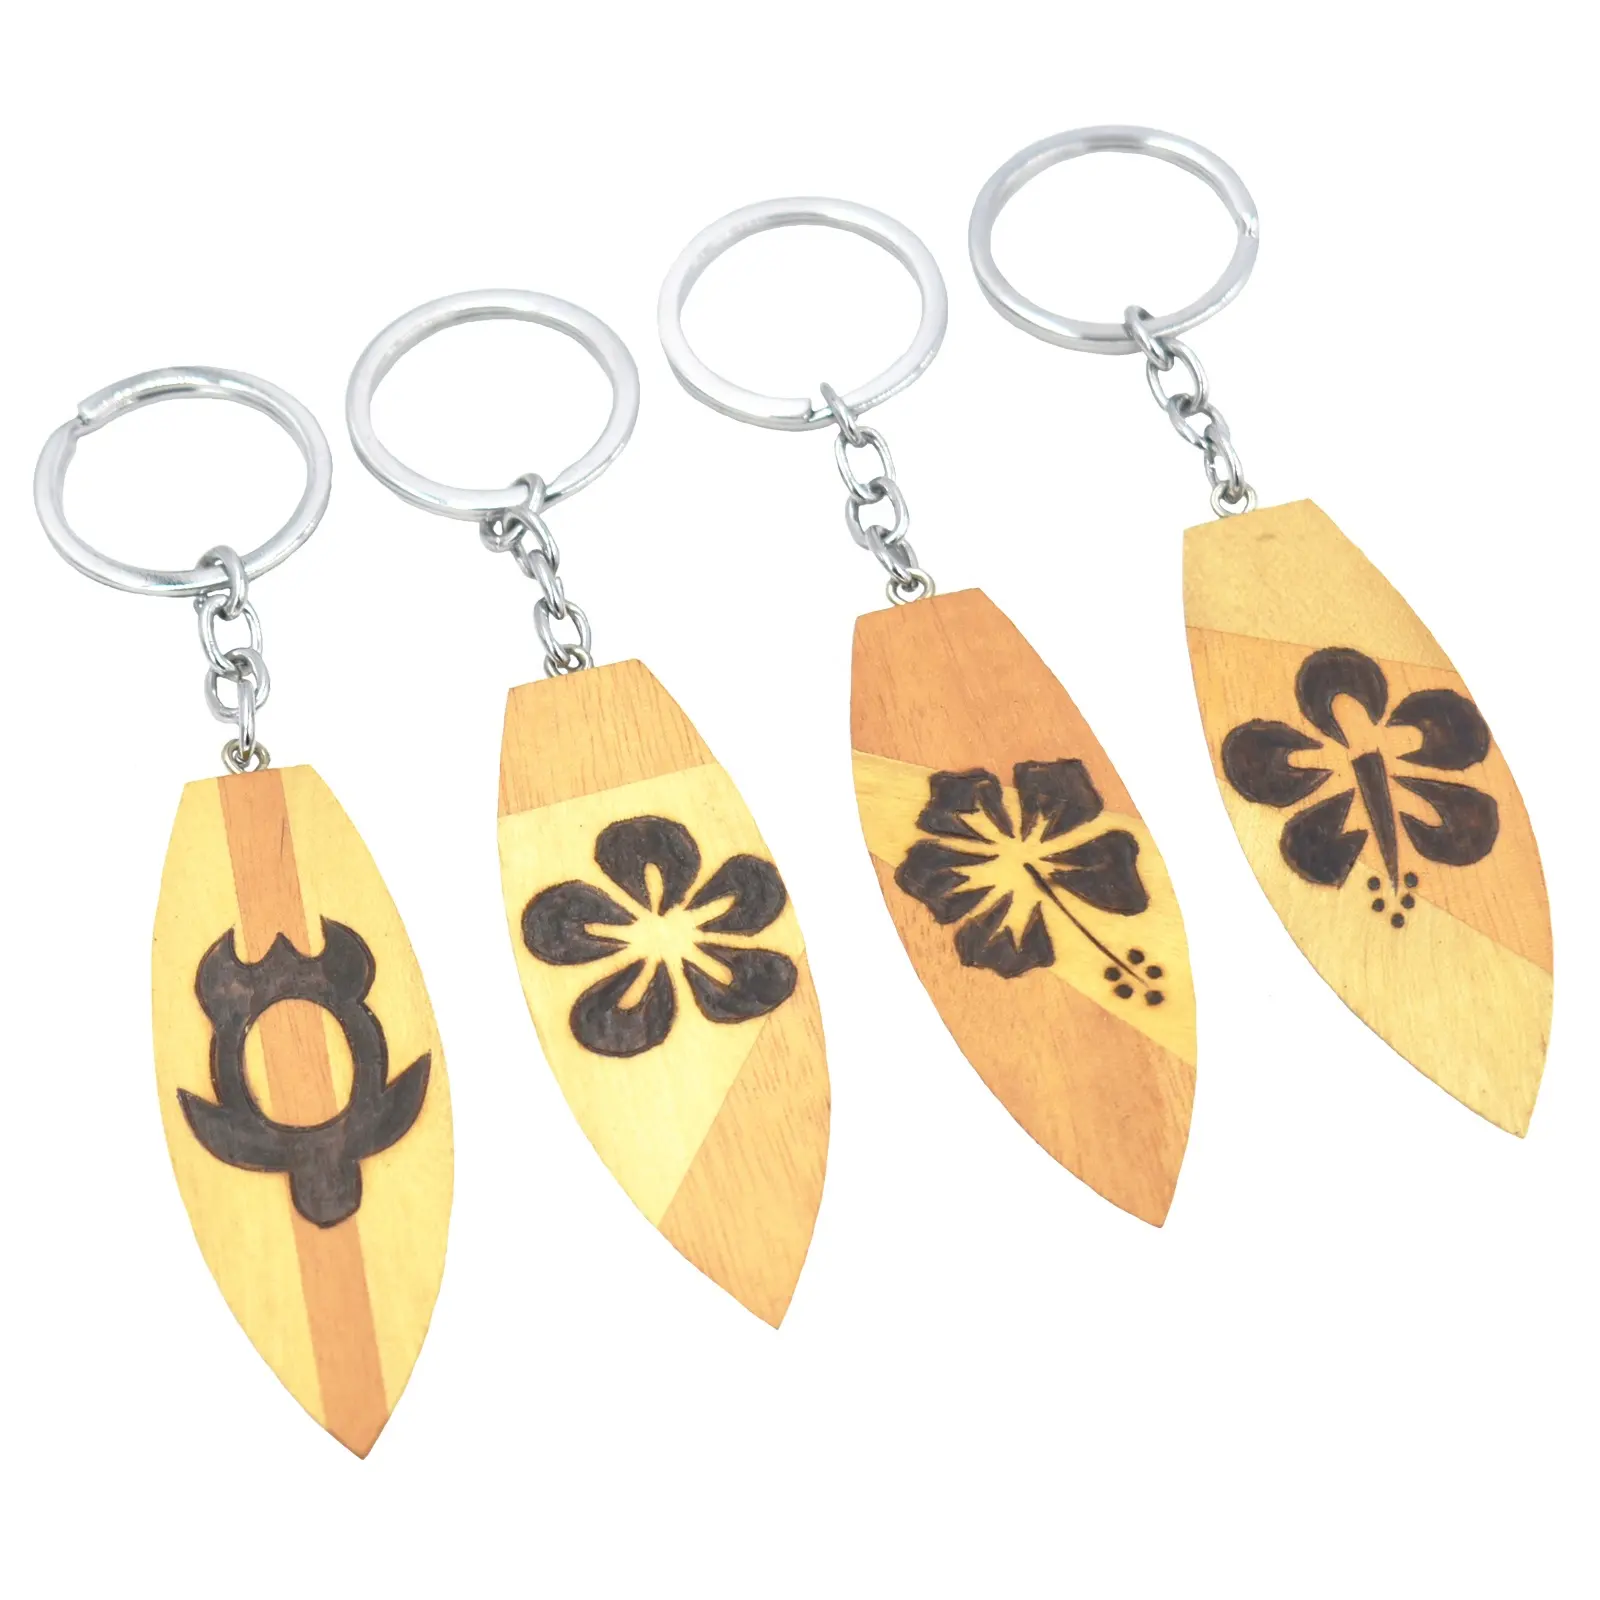 New design surfboard key chain with burning printed key holder customized shape wood carving key ring